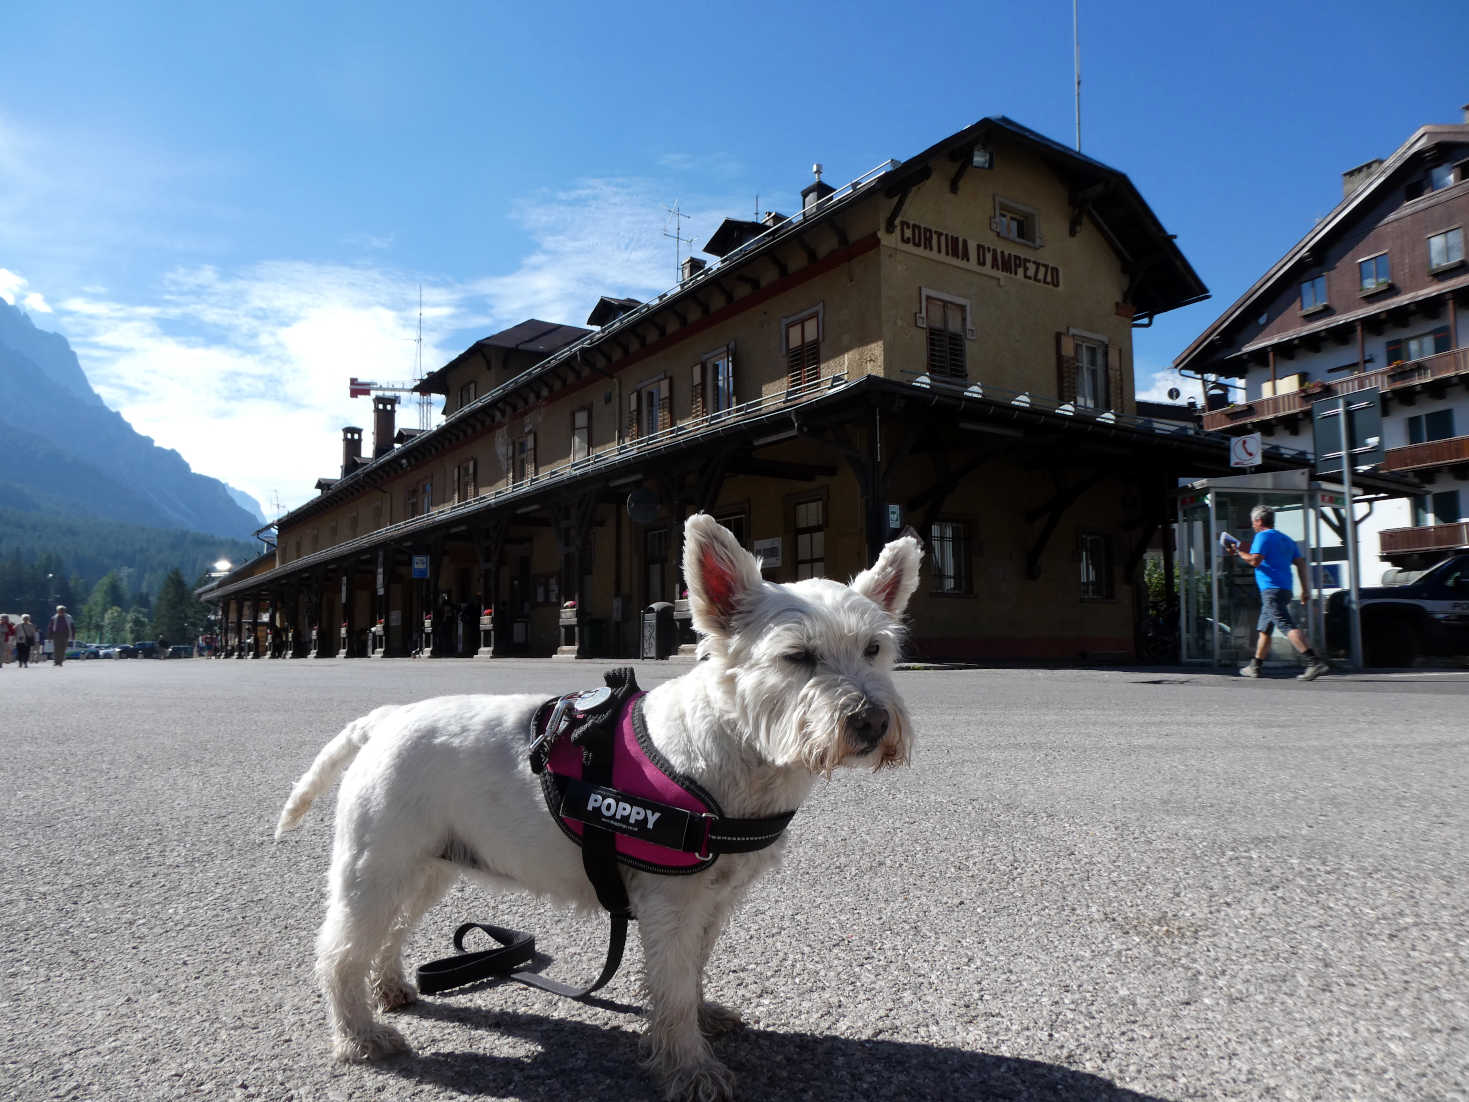 poppy the westie at bus station in Cortina